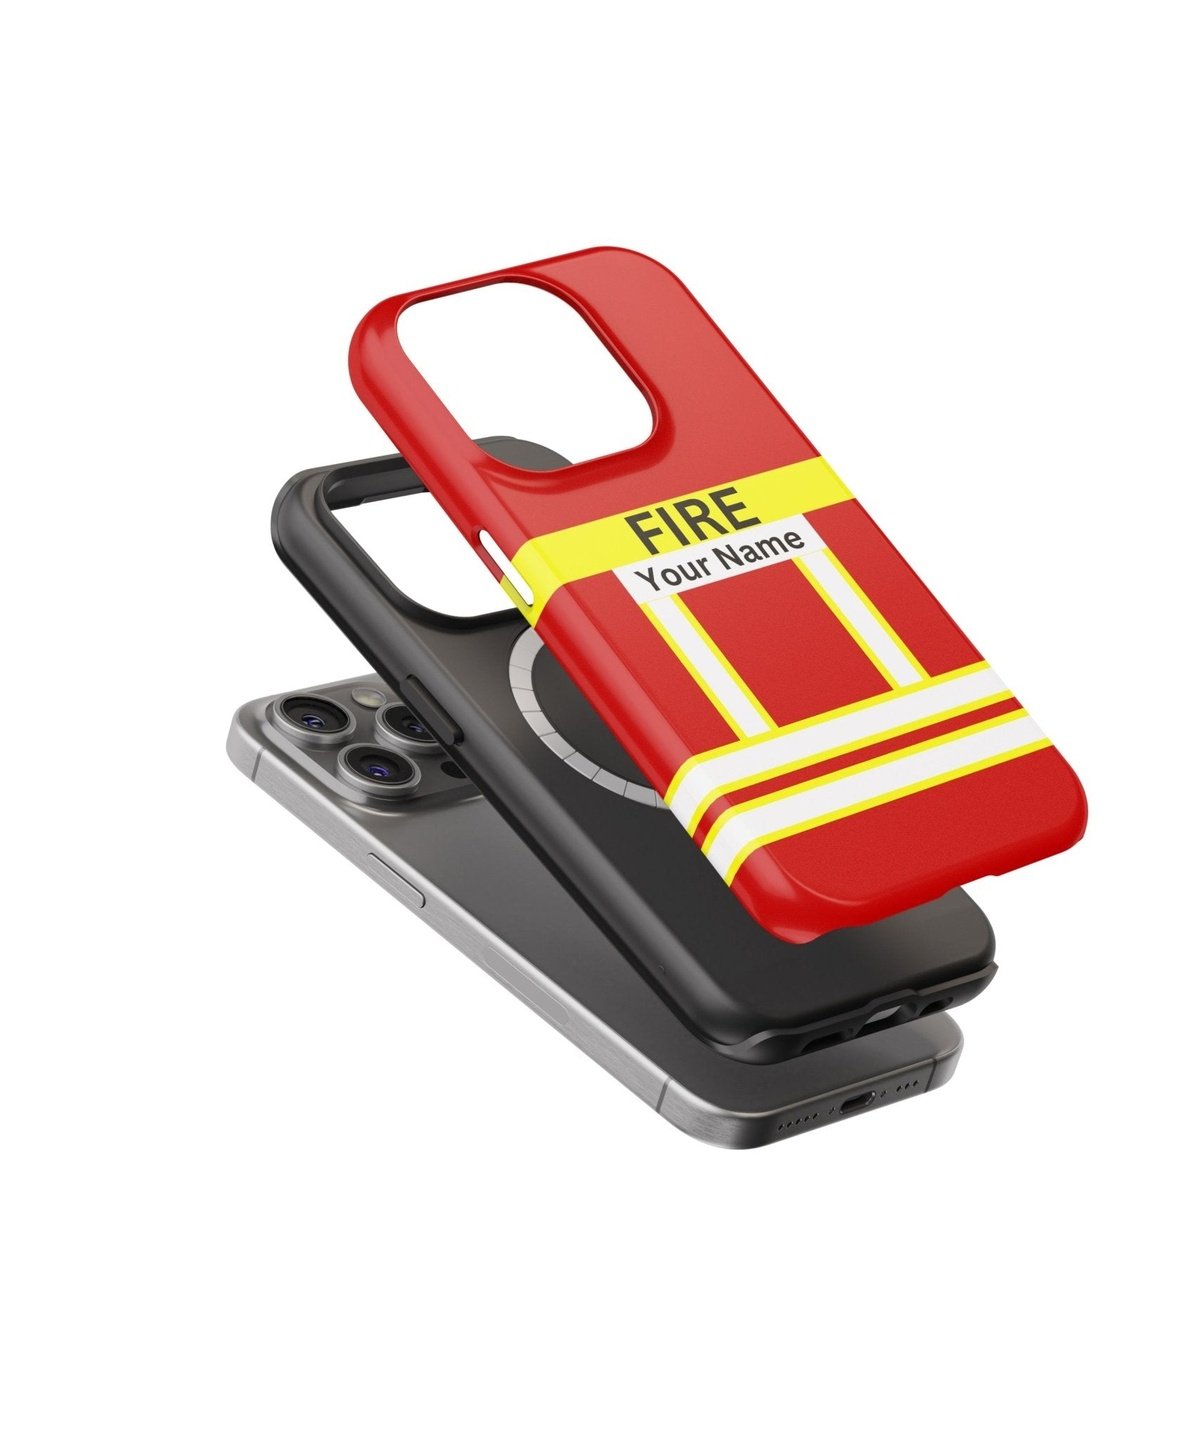 Firefighter Red Personalizable - iPhone Case